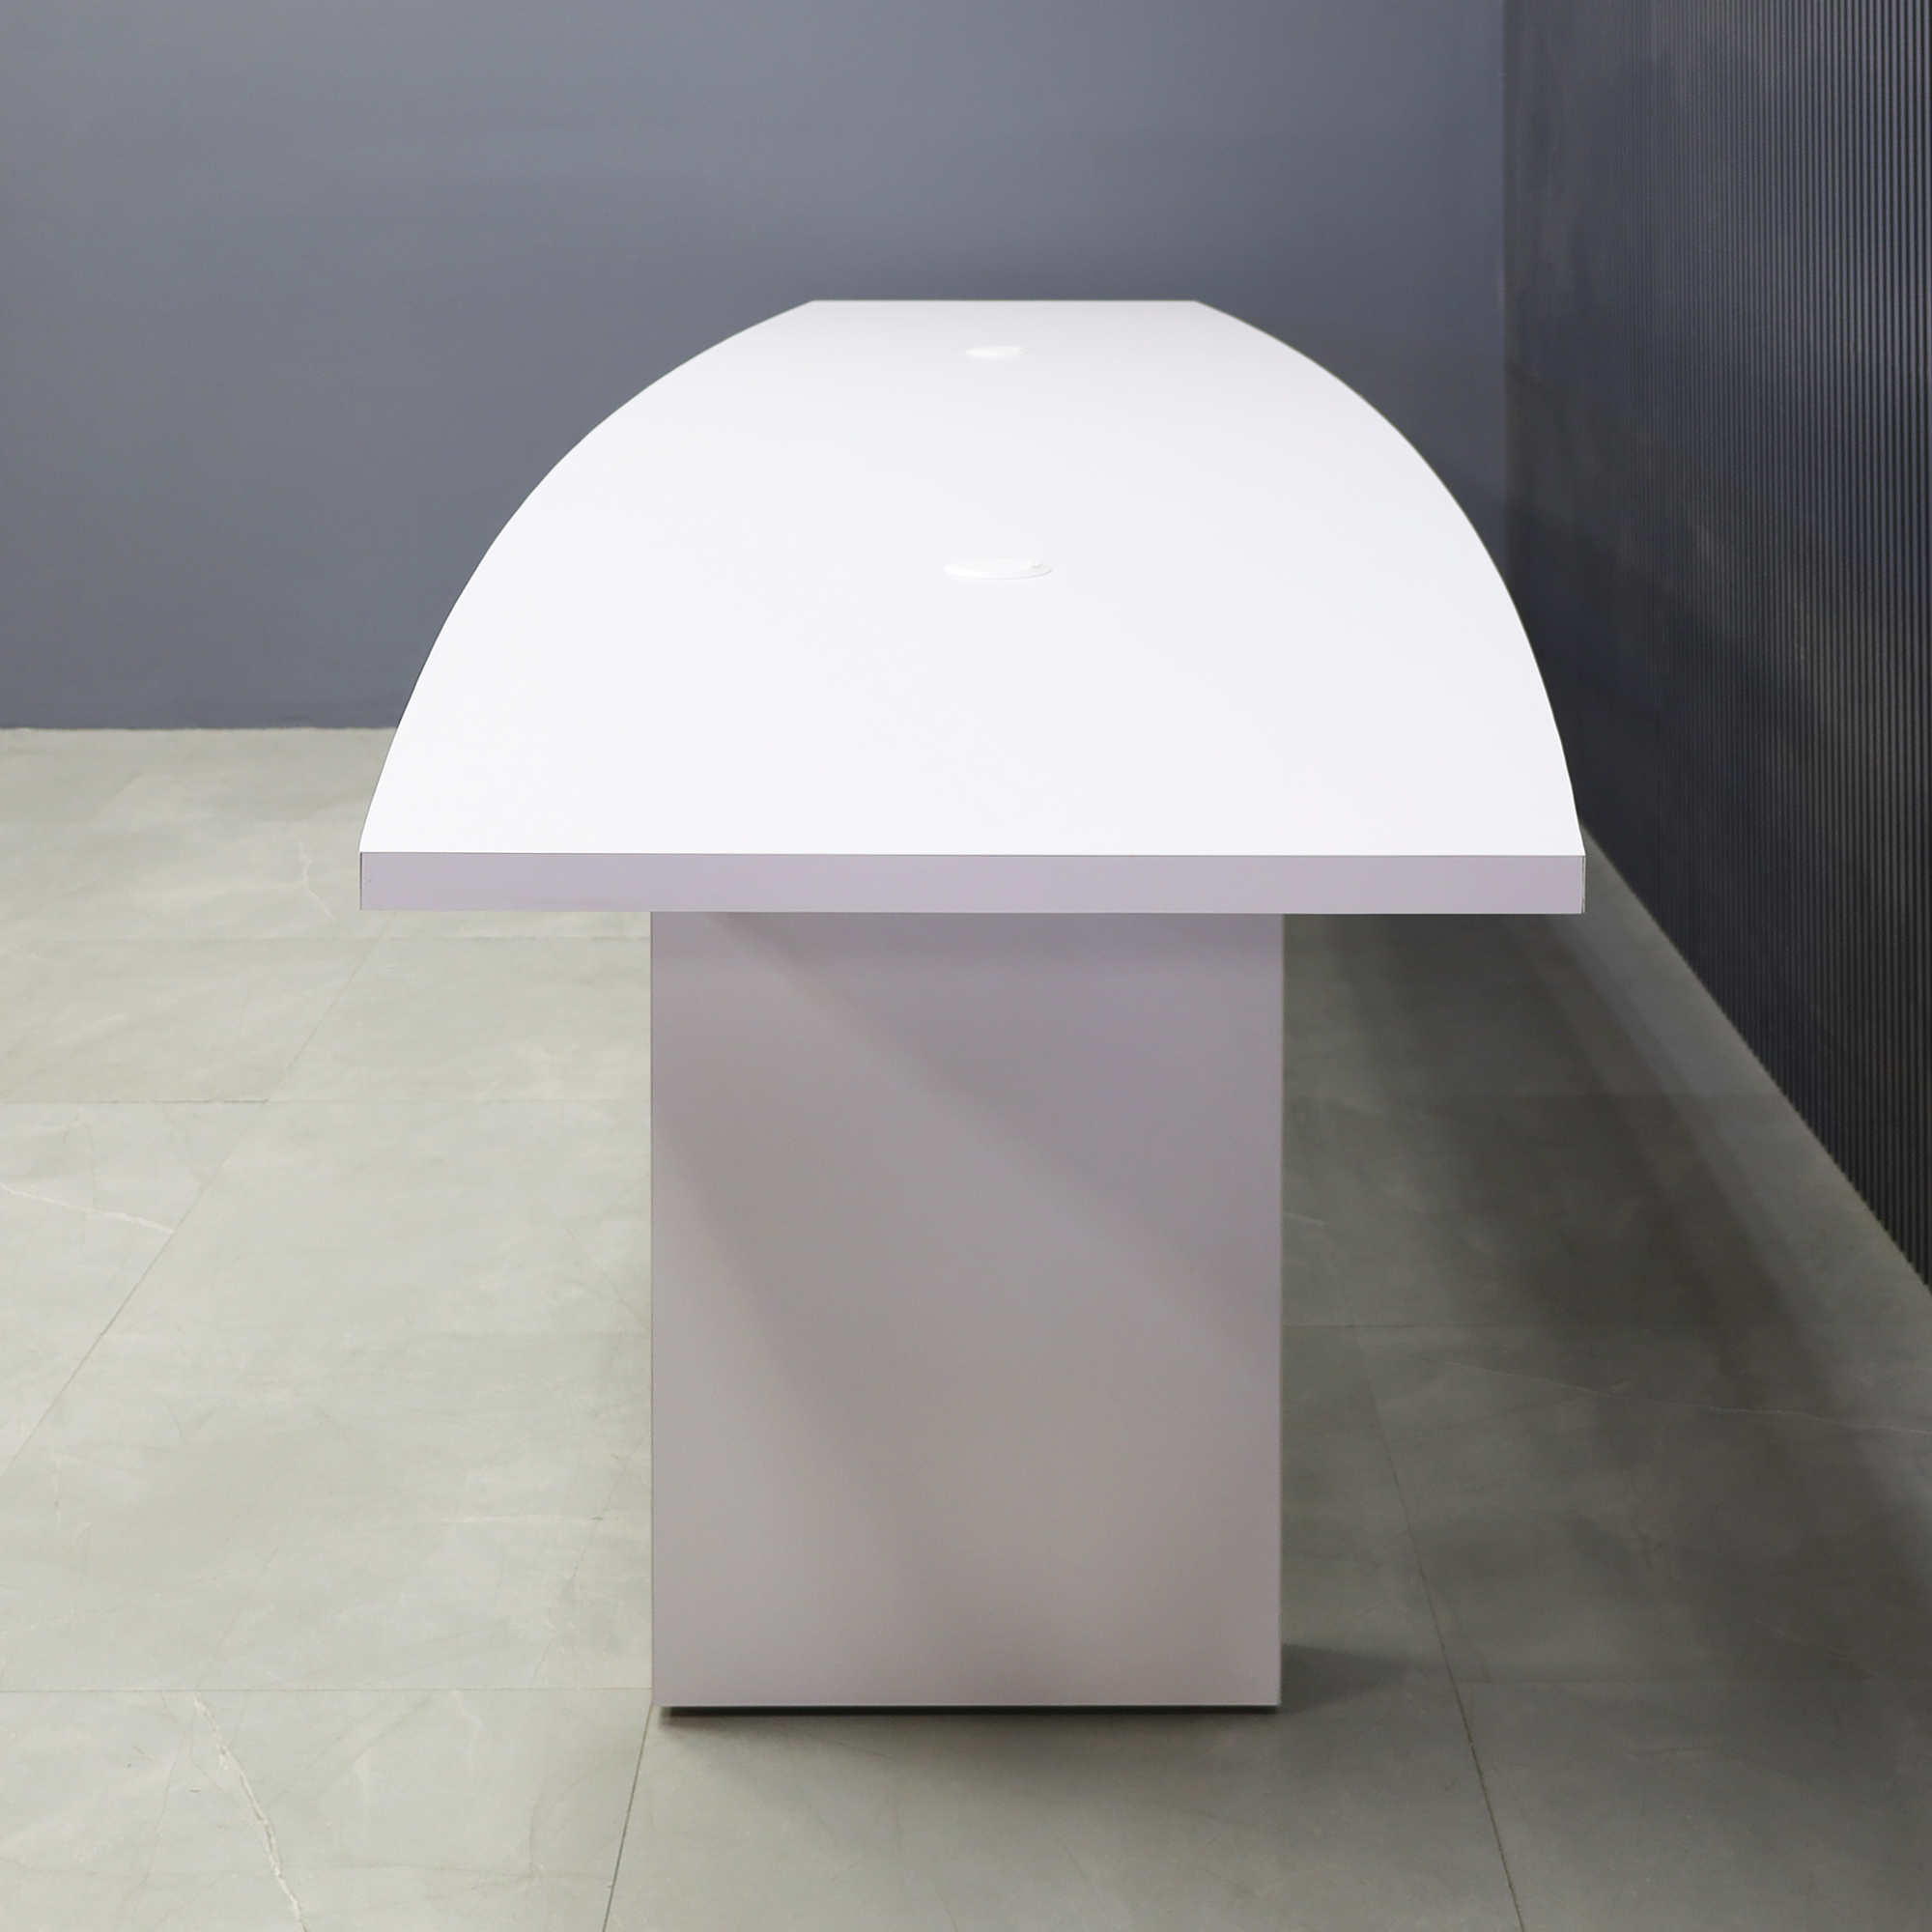 132-inch Counter Height Collaboration and Huddle Table in white matte laminate top and base with MX1 powerboxes shown here.